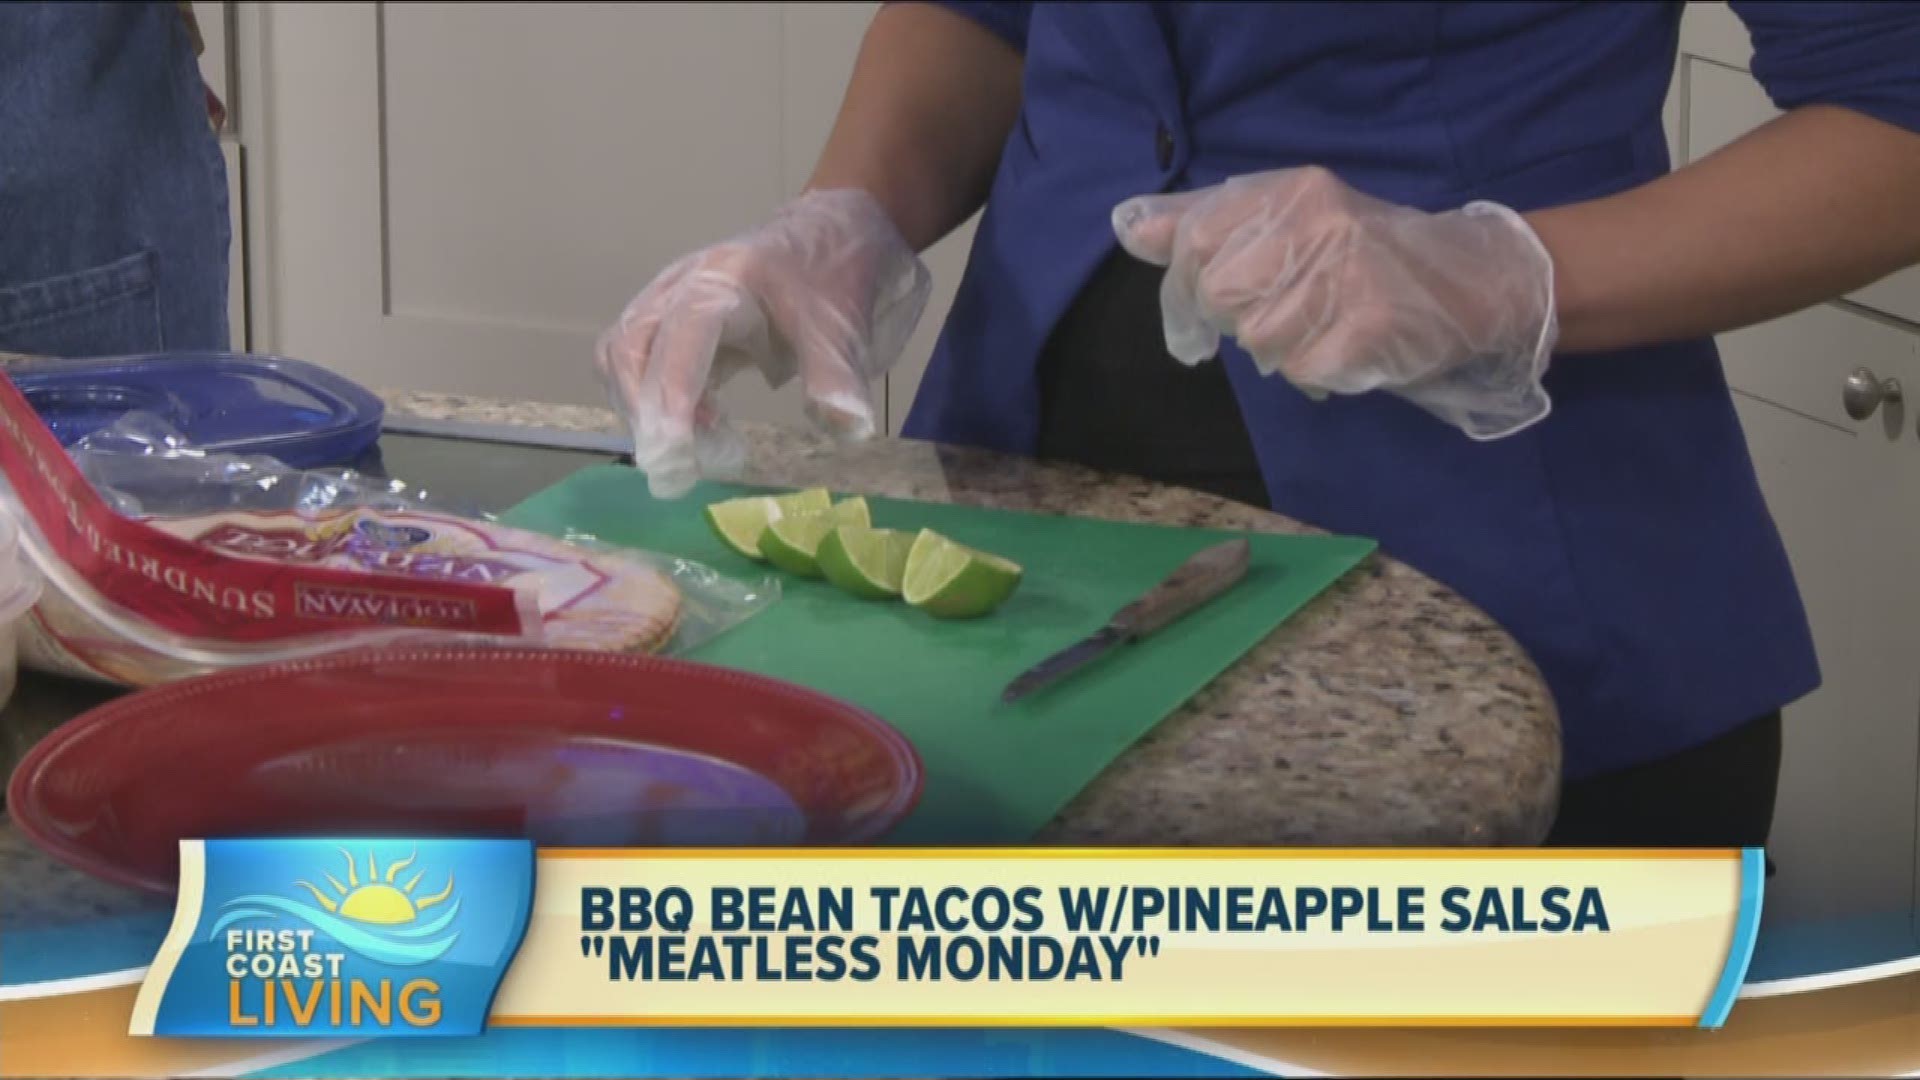 If you love tacos, barbeque and pineapples you'll love this spin on a taco recipe for Meatless Monday.